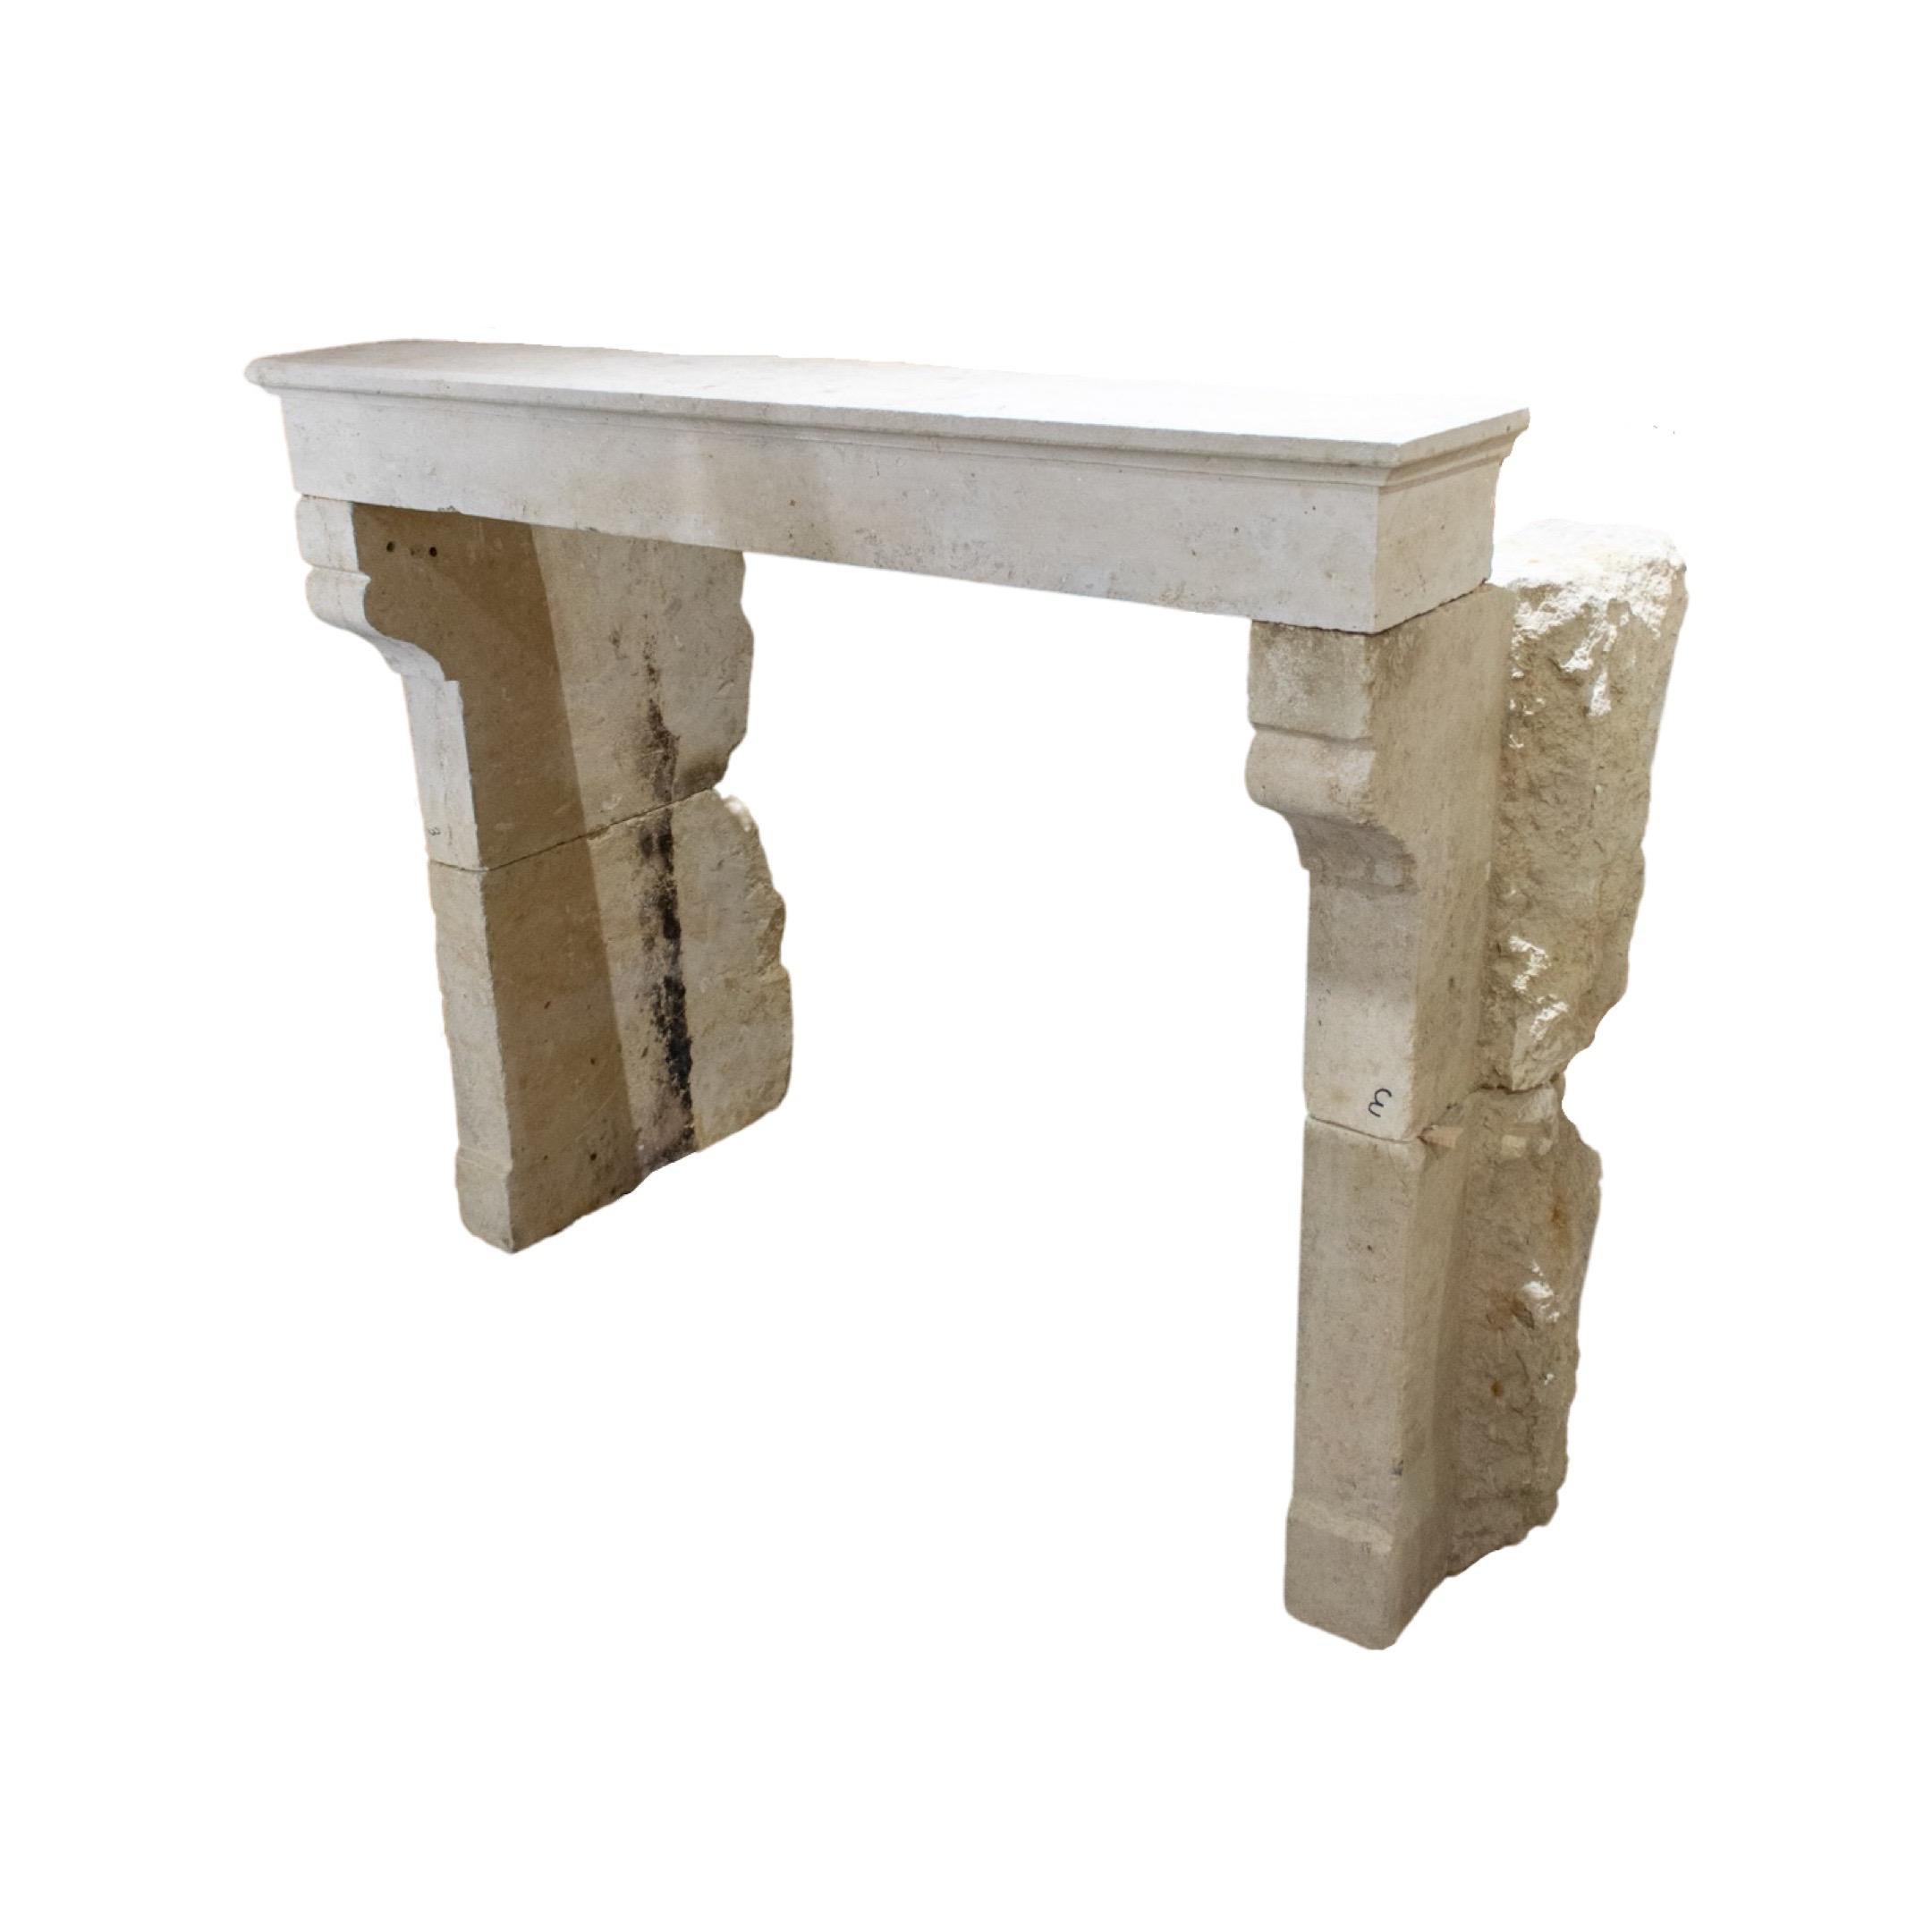 Mantel made out of Limestone. Originates from France. Circa, 18th c.